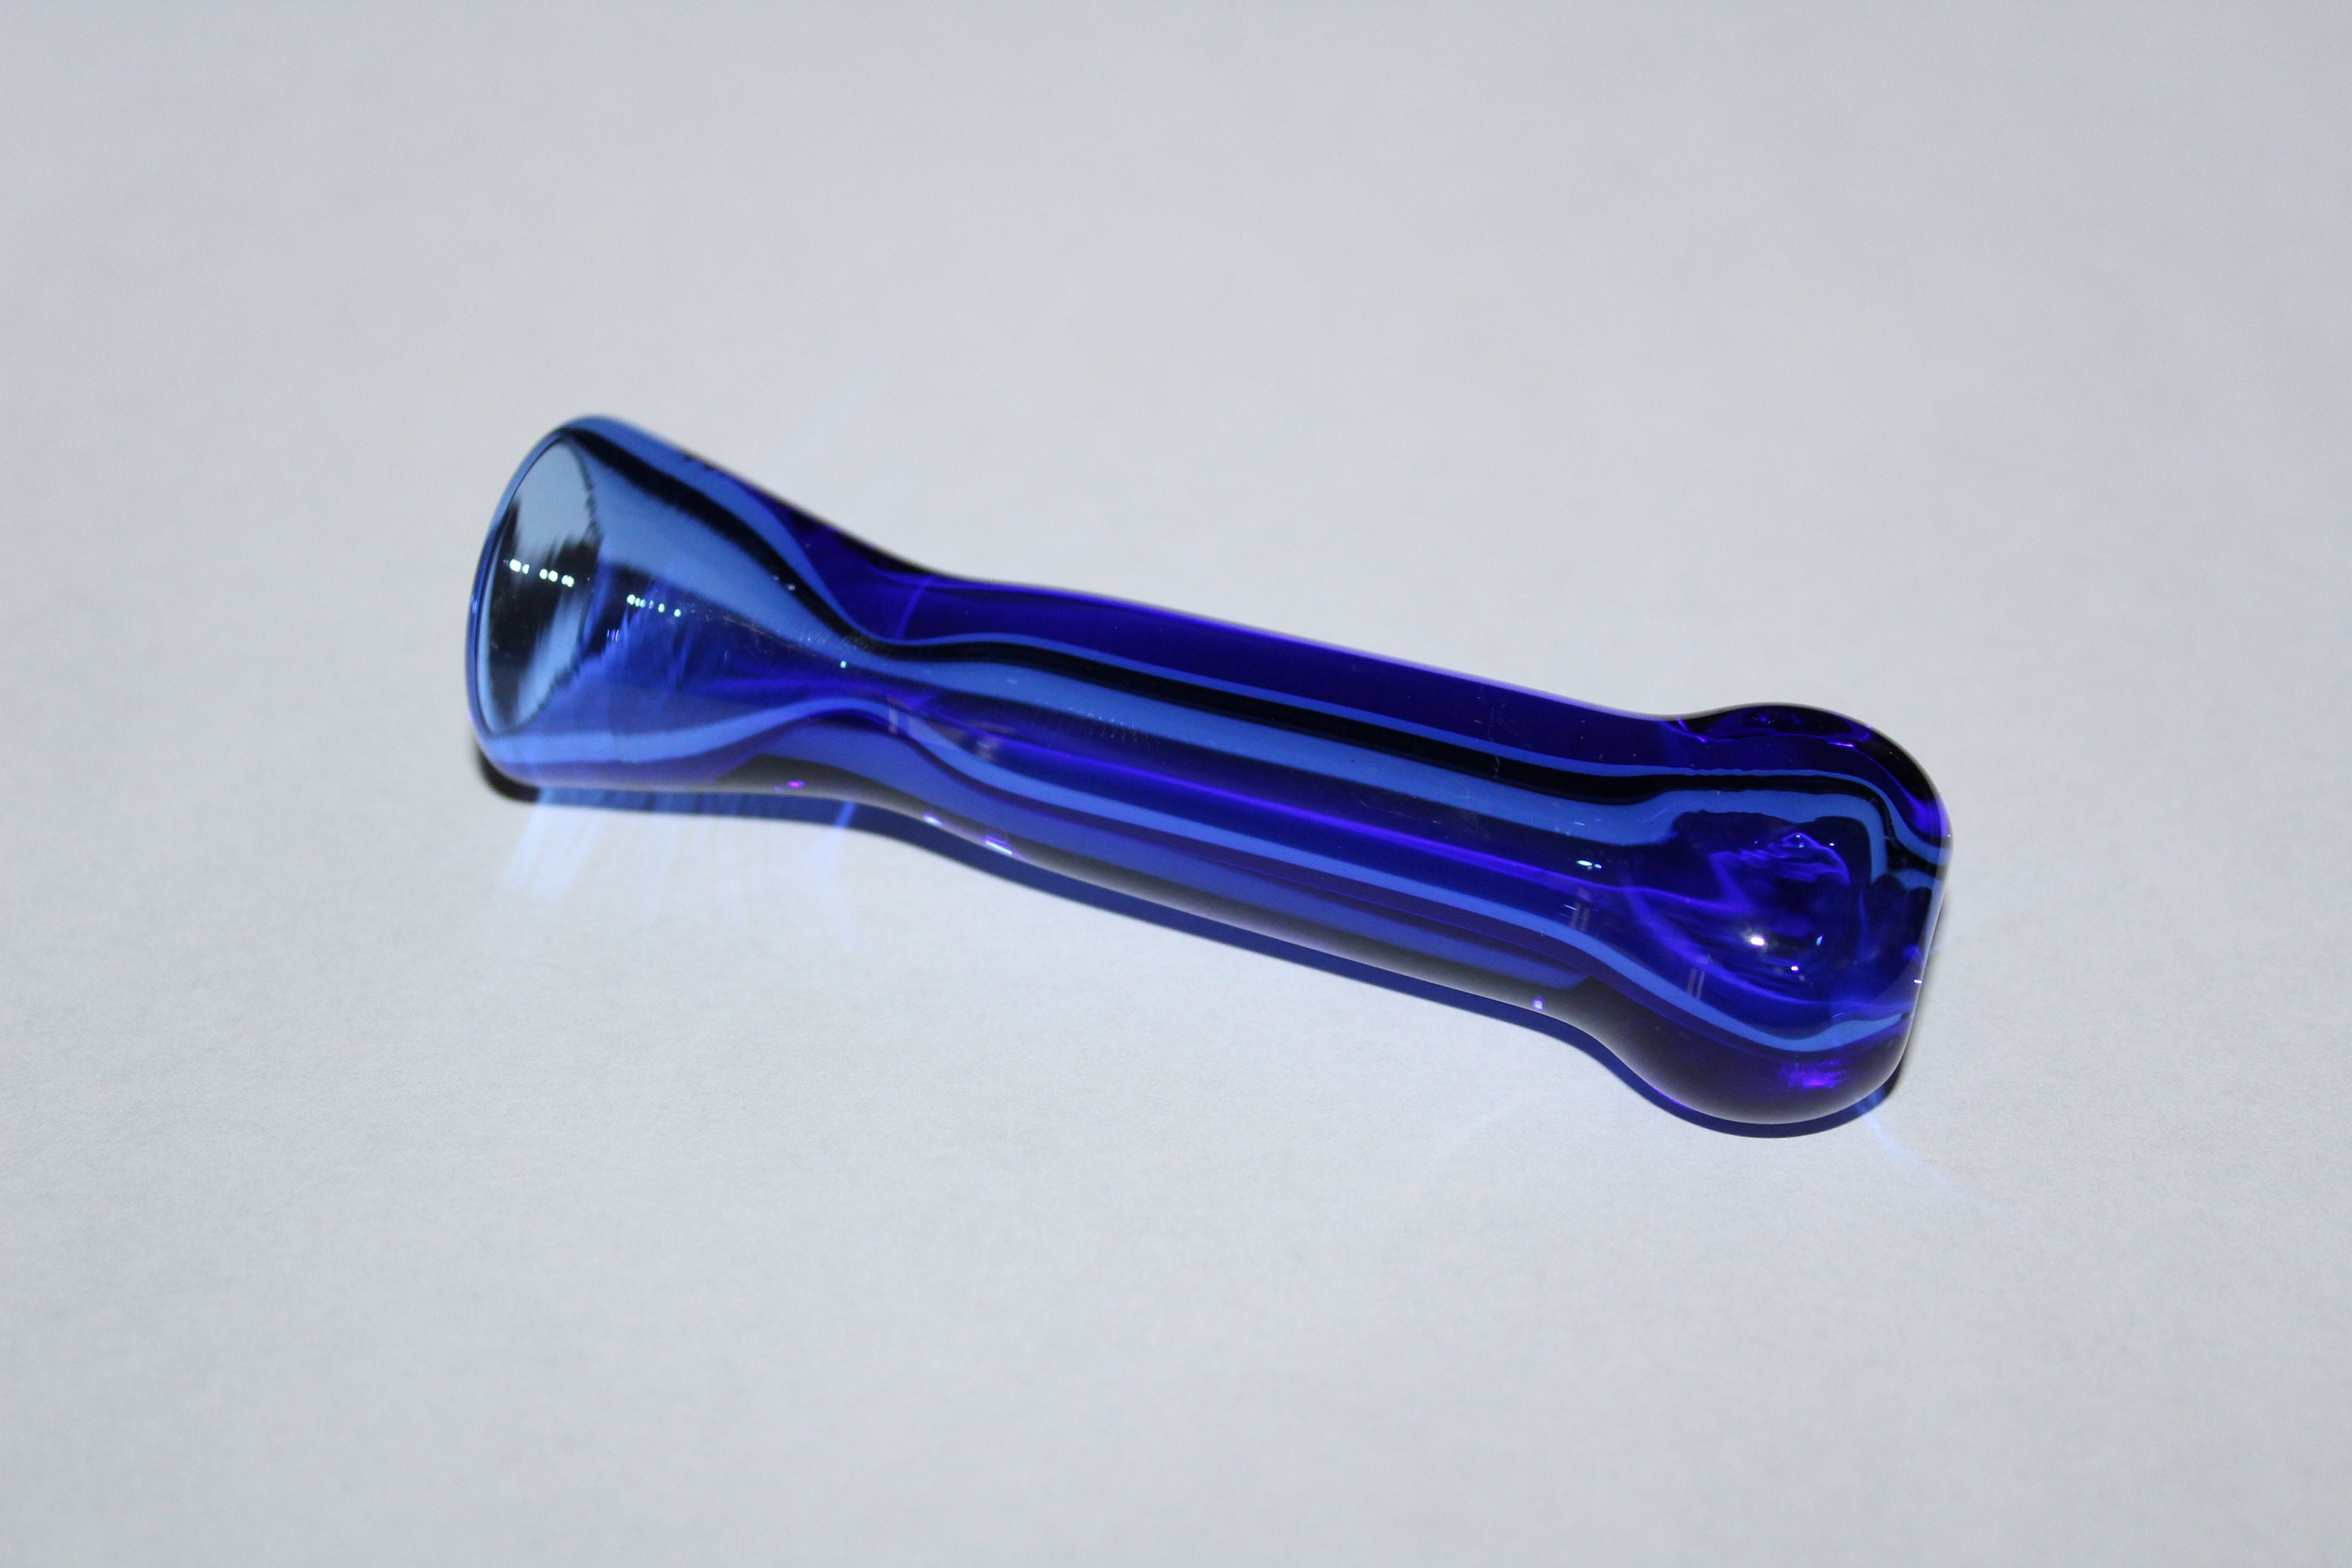 4 TIE DYE SILICONE and GLASS Pipe w/ EXTRA BOWL – The Hippie Momma Shop